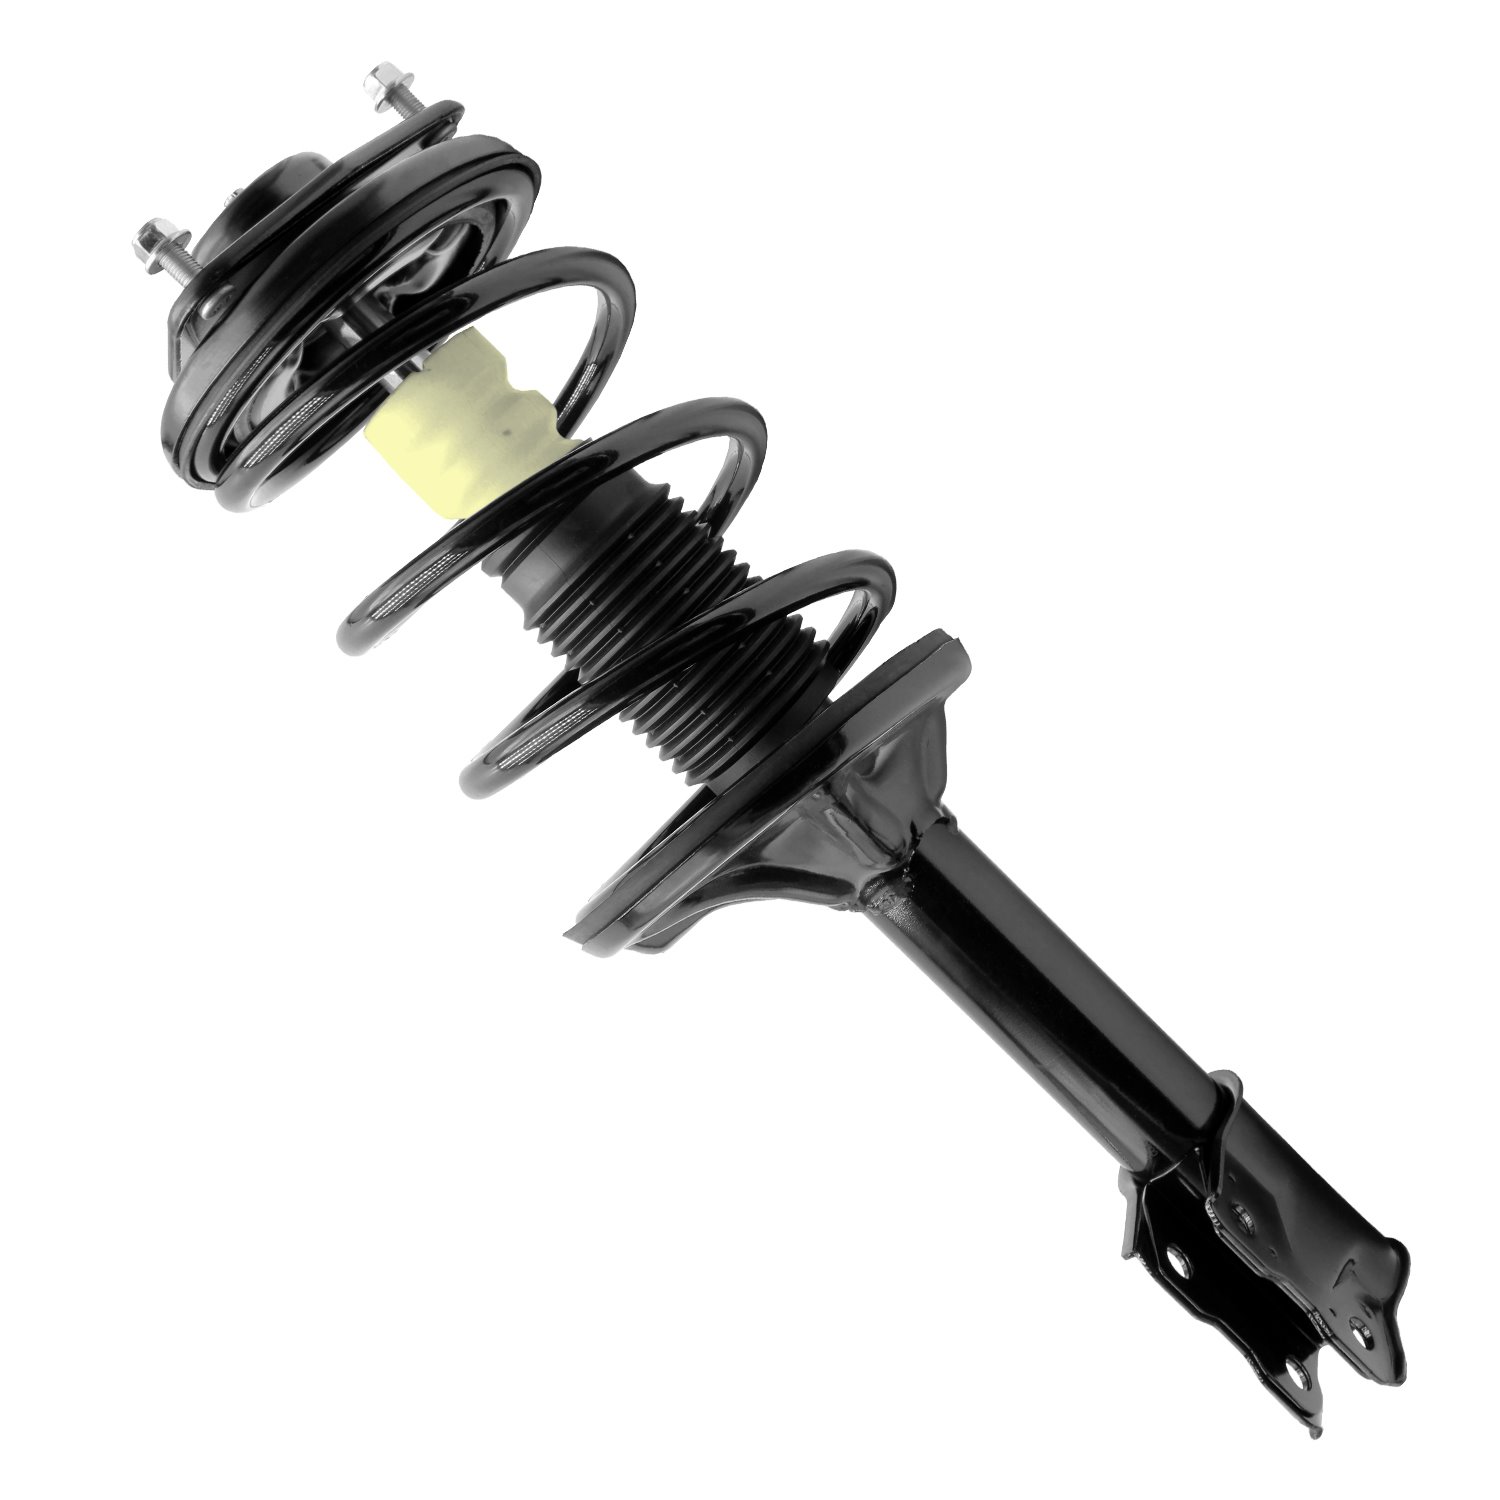 13740 Front Suspension Strut & Coil Spring Assemby Fits Select Mitsubishi Outlander